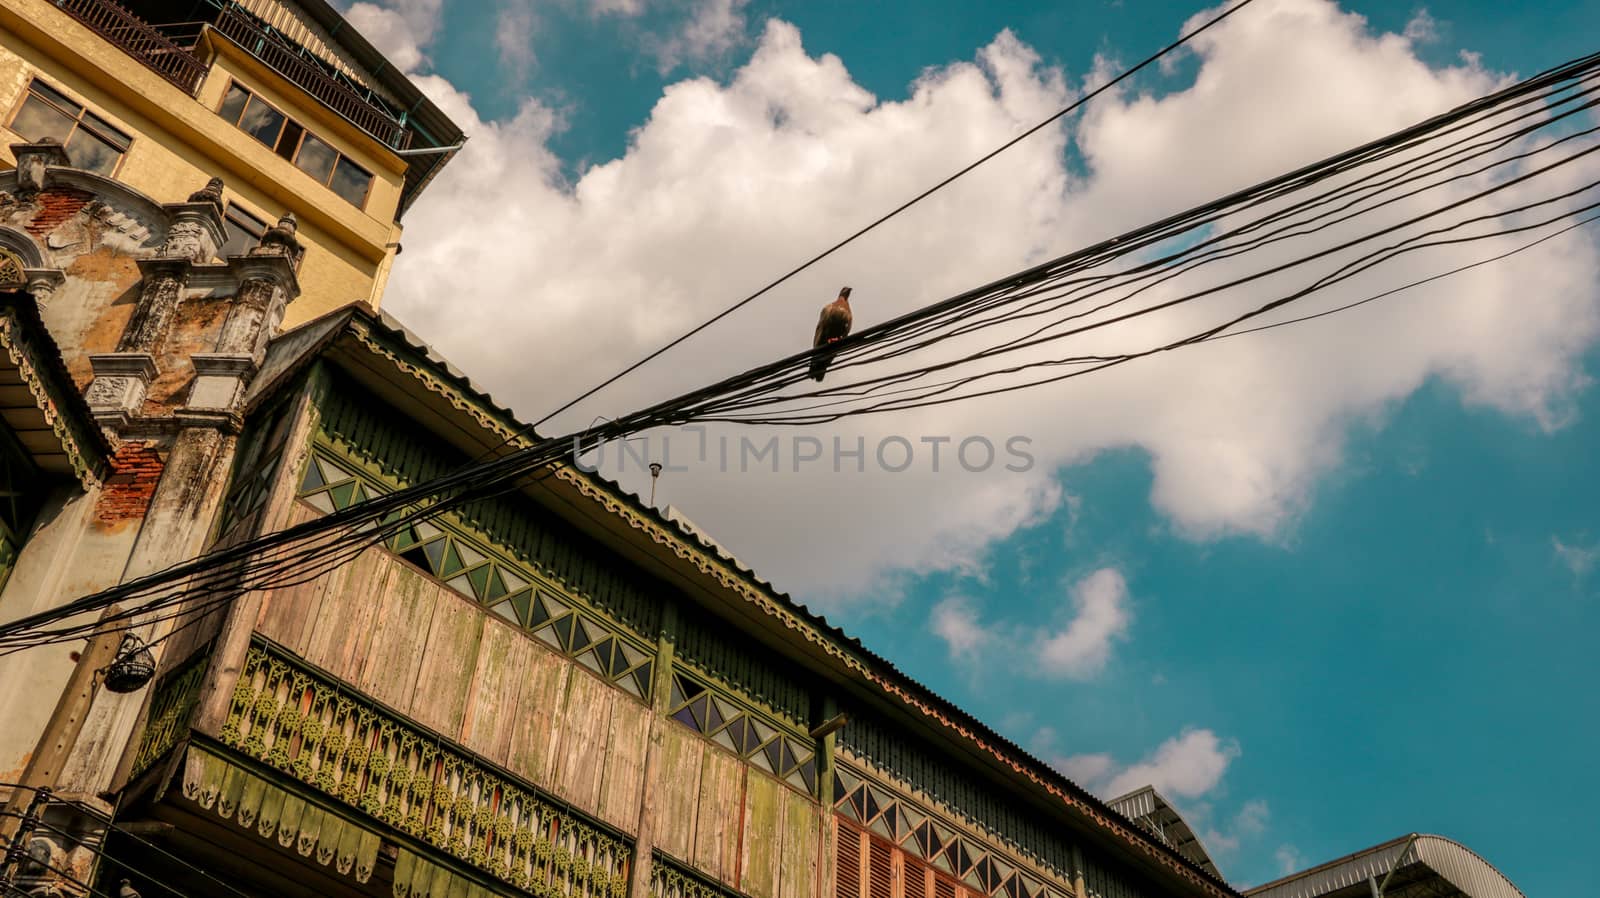 Ancient Wooden House with a Bird on Electric Wires - Bright Clou by annespelledwithane